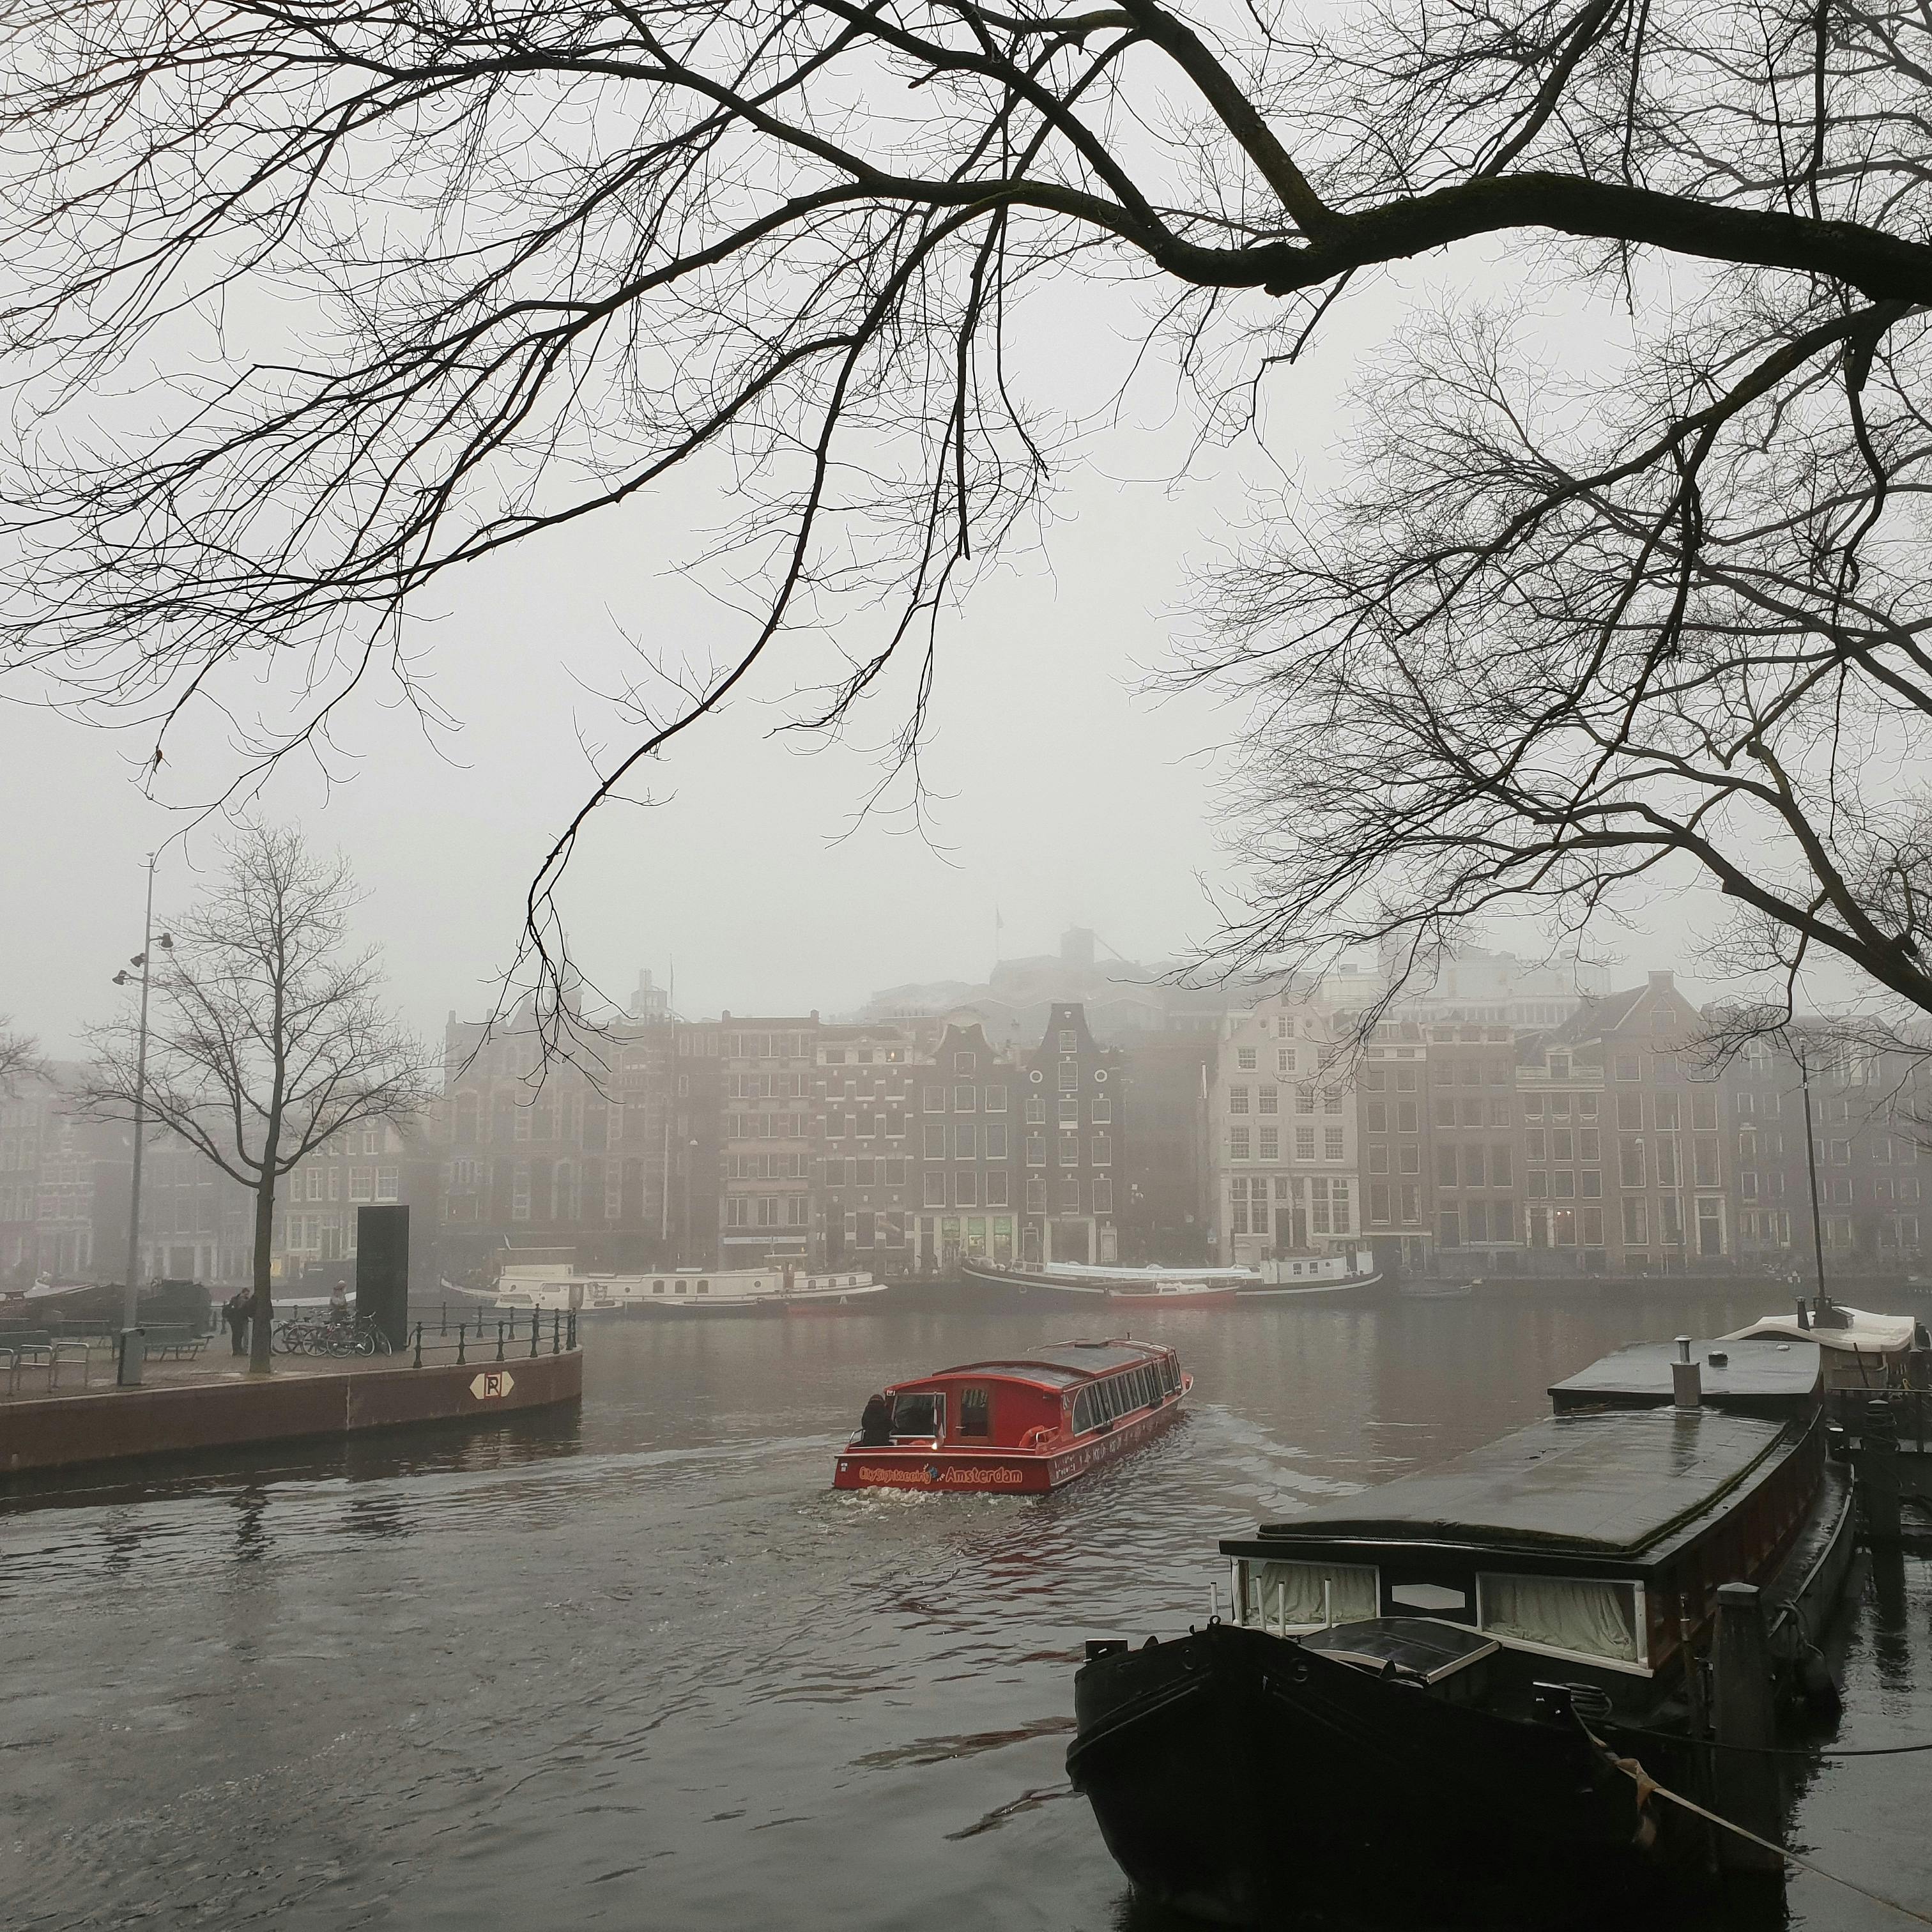 Free stock photo of #city #fog #winter #canals #travel #boat #adam